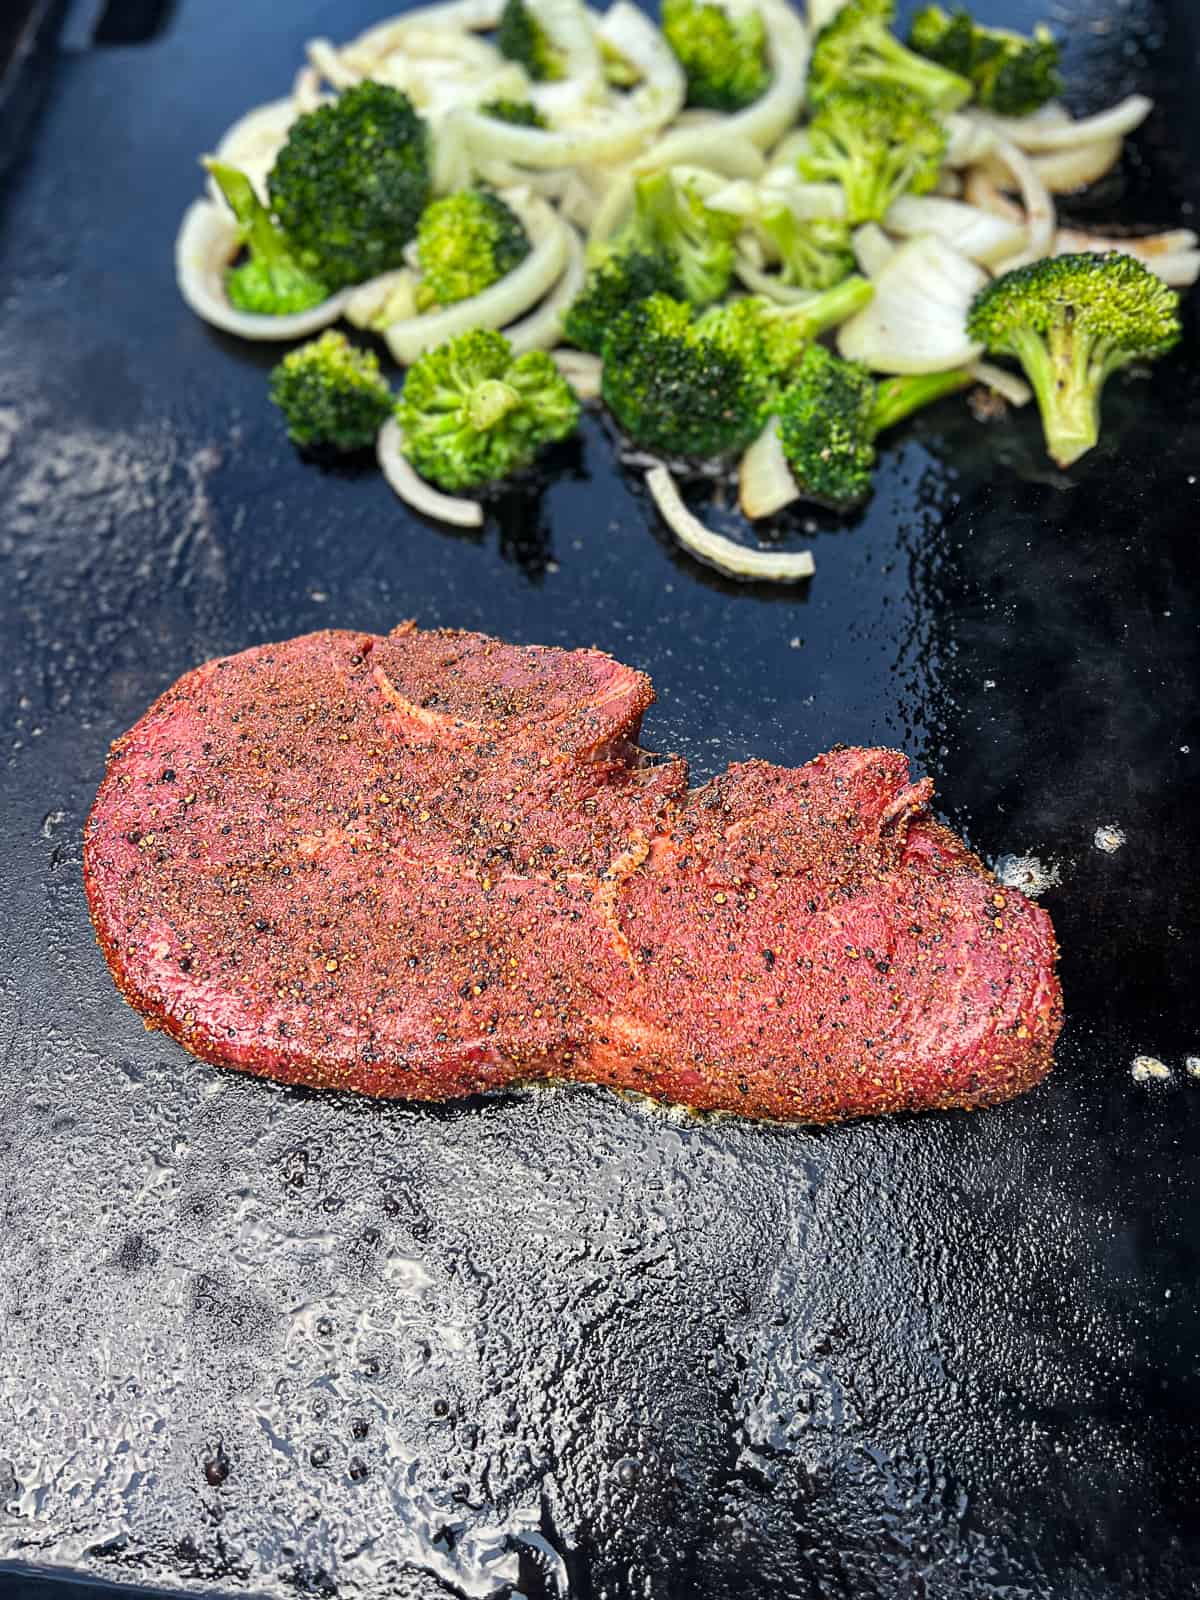 Griddle Cooking Sirloin Steak on Traeger Flatrock with broccoli and onions